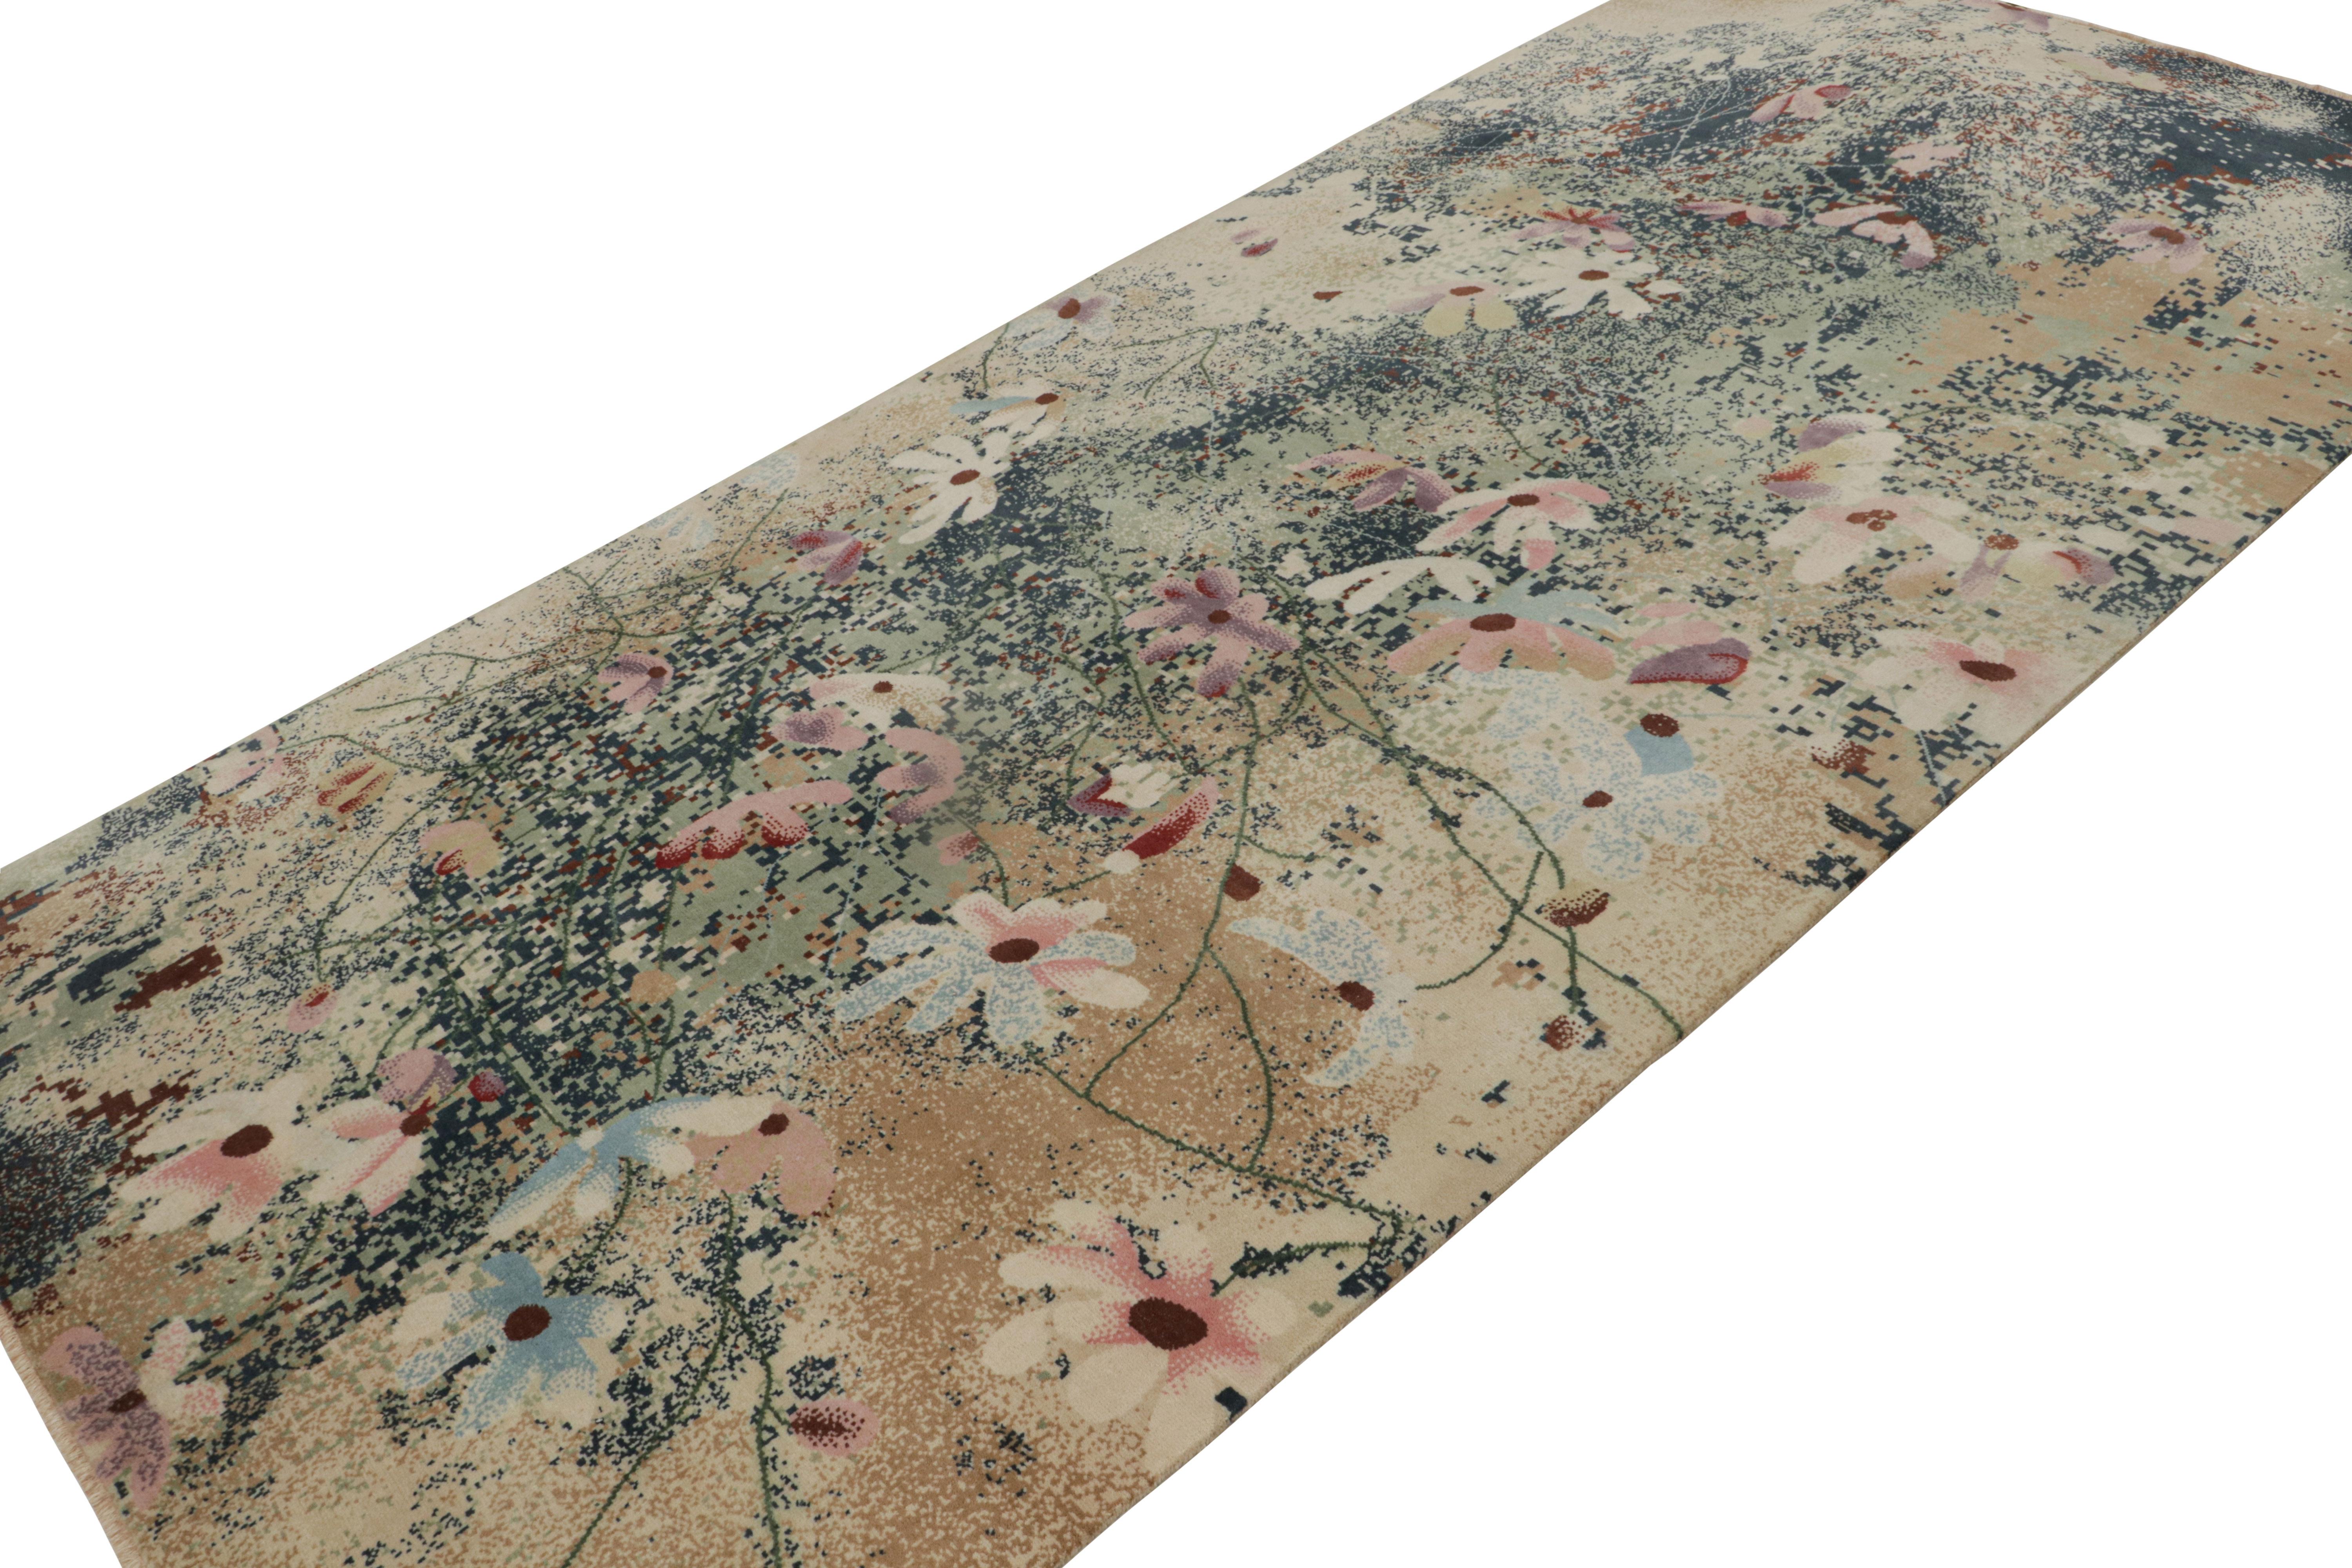 Hand-knotted in wool, this 6x12 modern abstract rug is a work of contemporary art as much as an art rug, bold yet whimsical. It features a design as inspired from botanicals and impressionist paintings of florals. 

On the Design: 

This